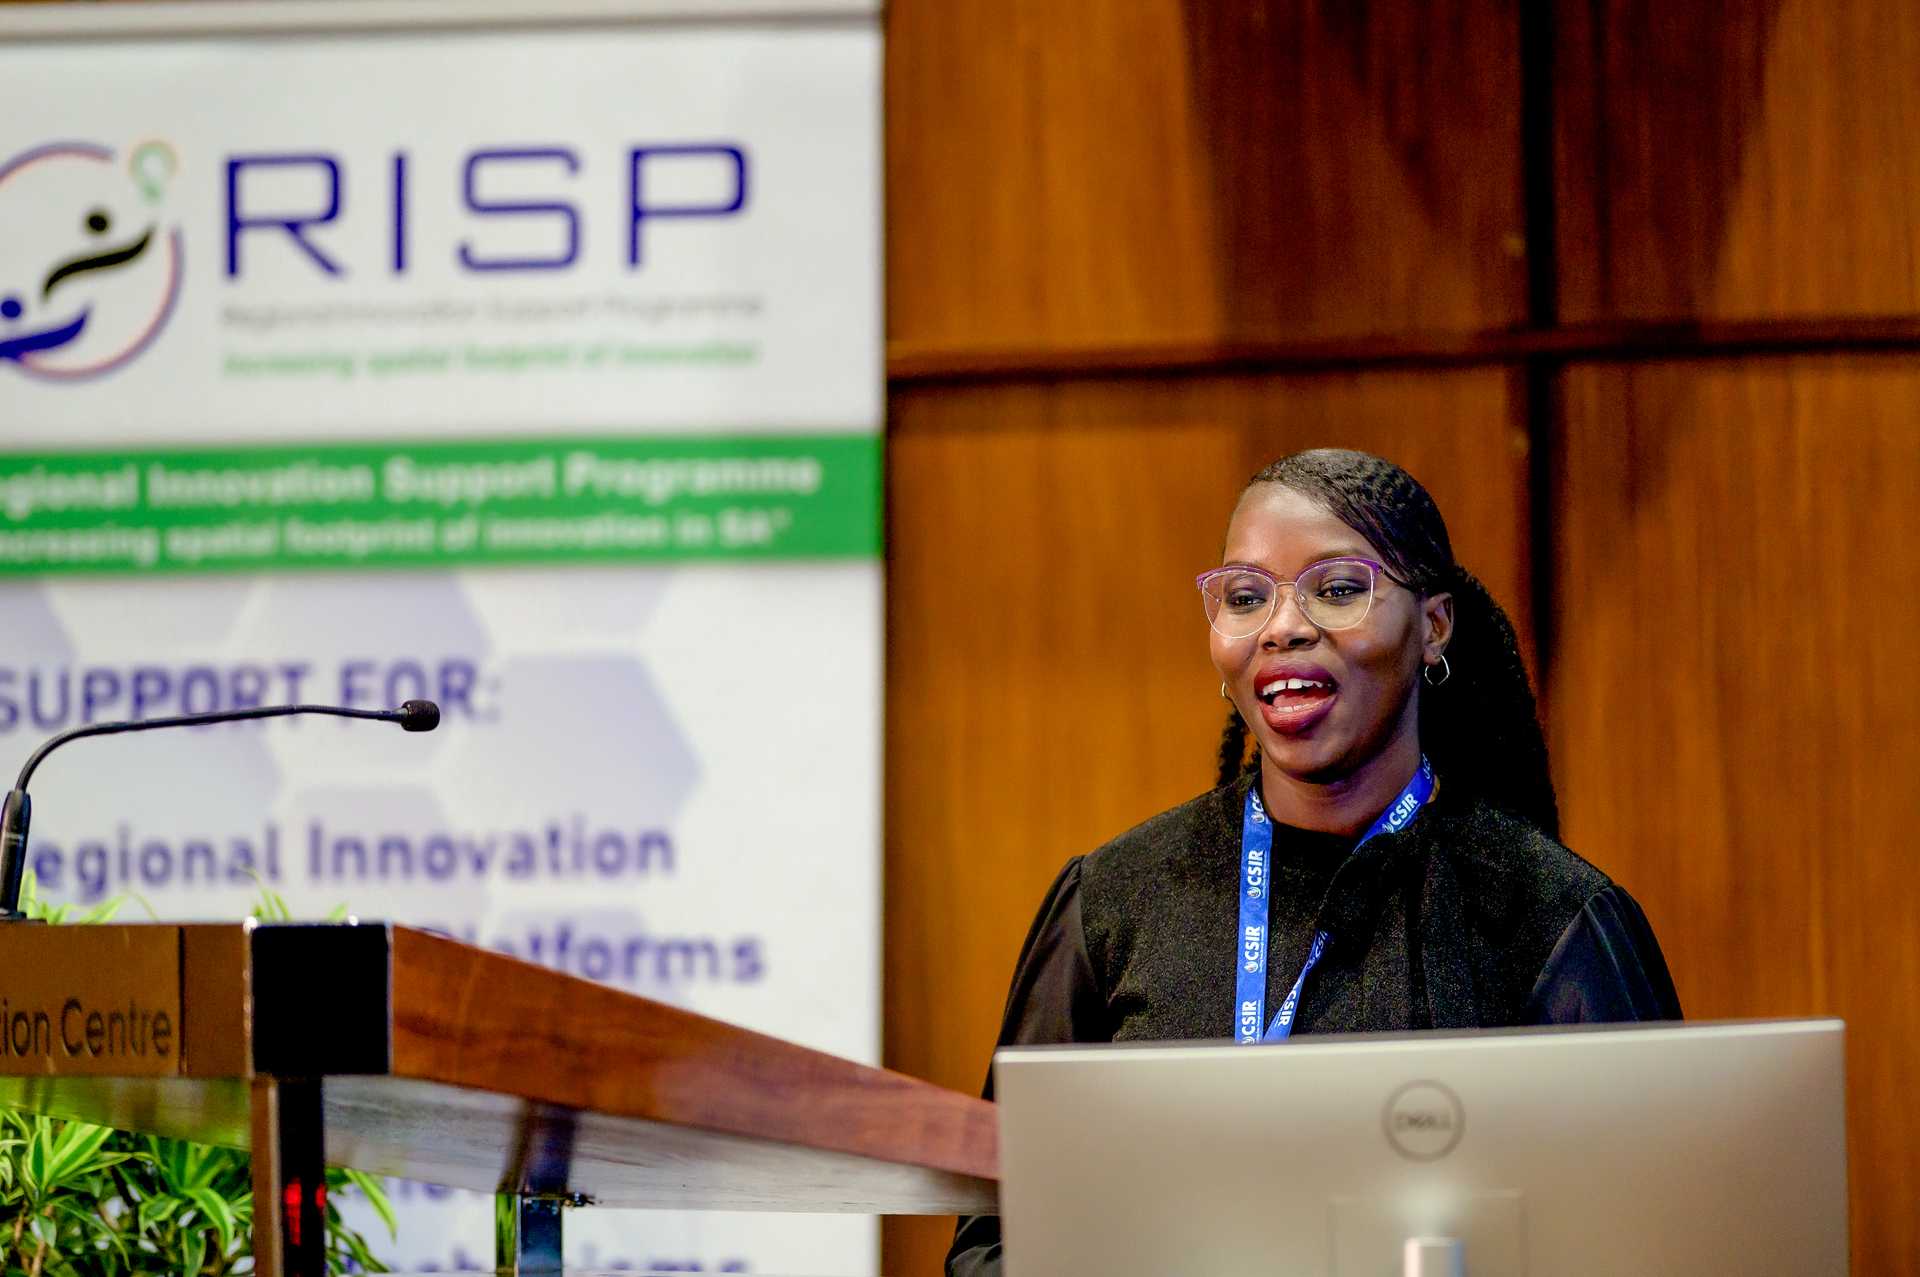 Mmapula Lesailane, CEO of Mater Pluviam Holdings, Takes 3rd Place at DSI/RISP Annual Innovation Forum